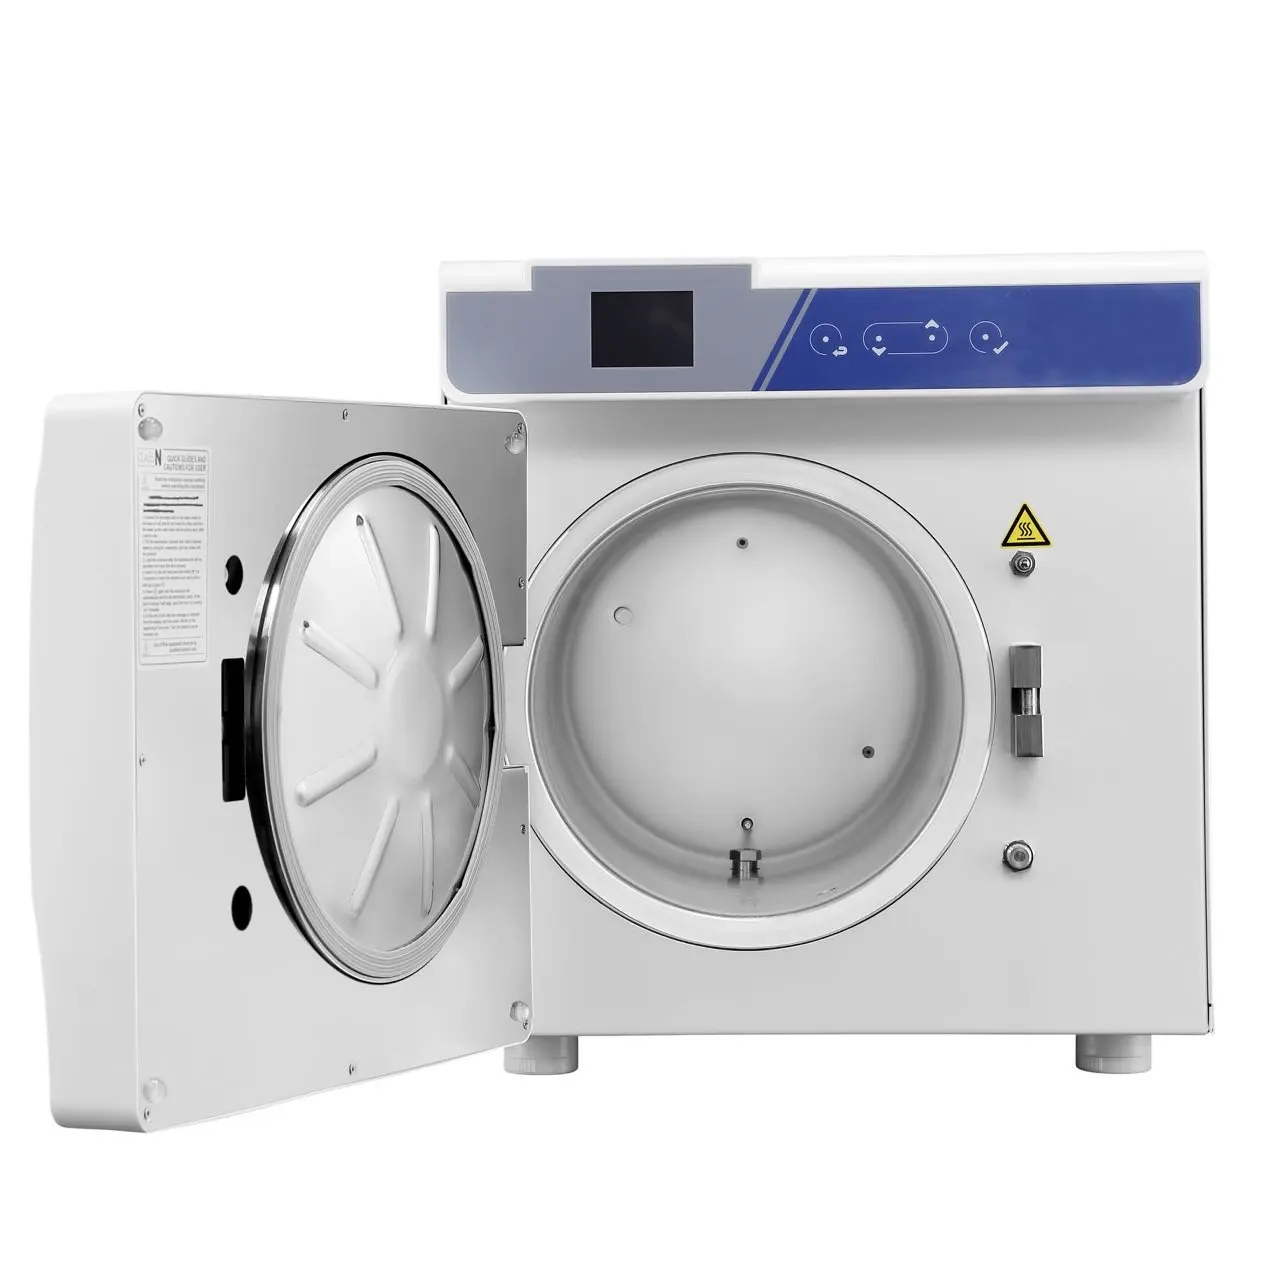 NEW Pharma Sterilizer Autoclaves 22l Steam Sterilizers For Baby Bottles